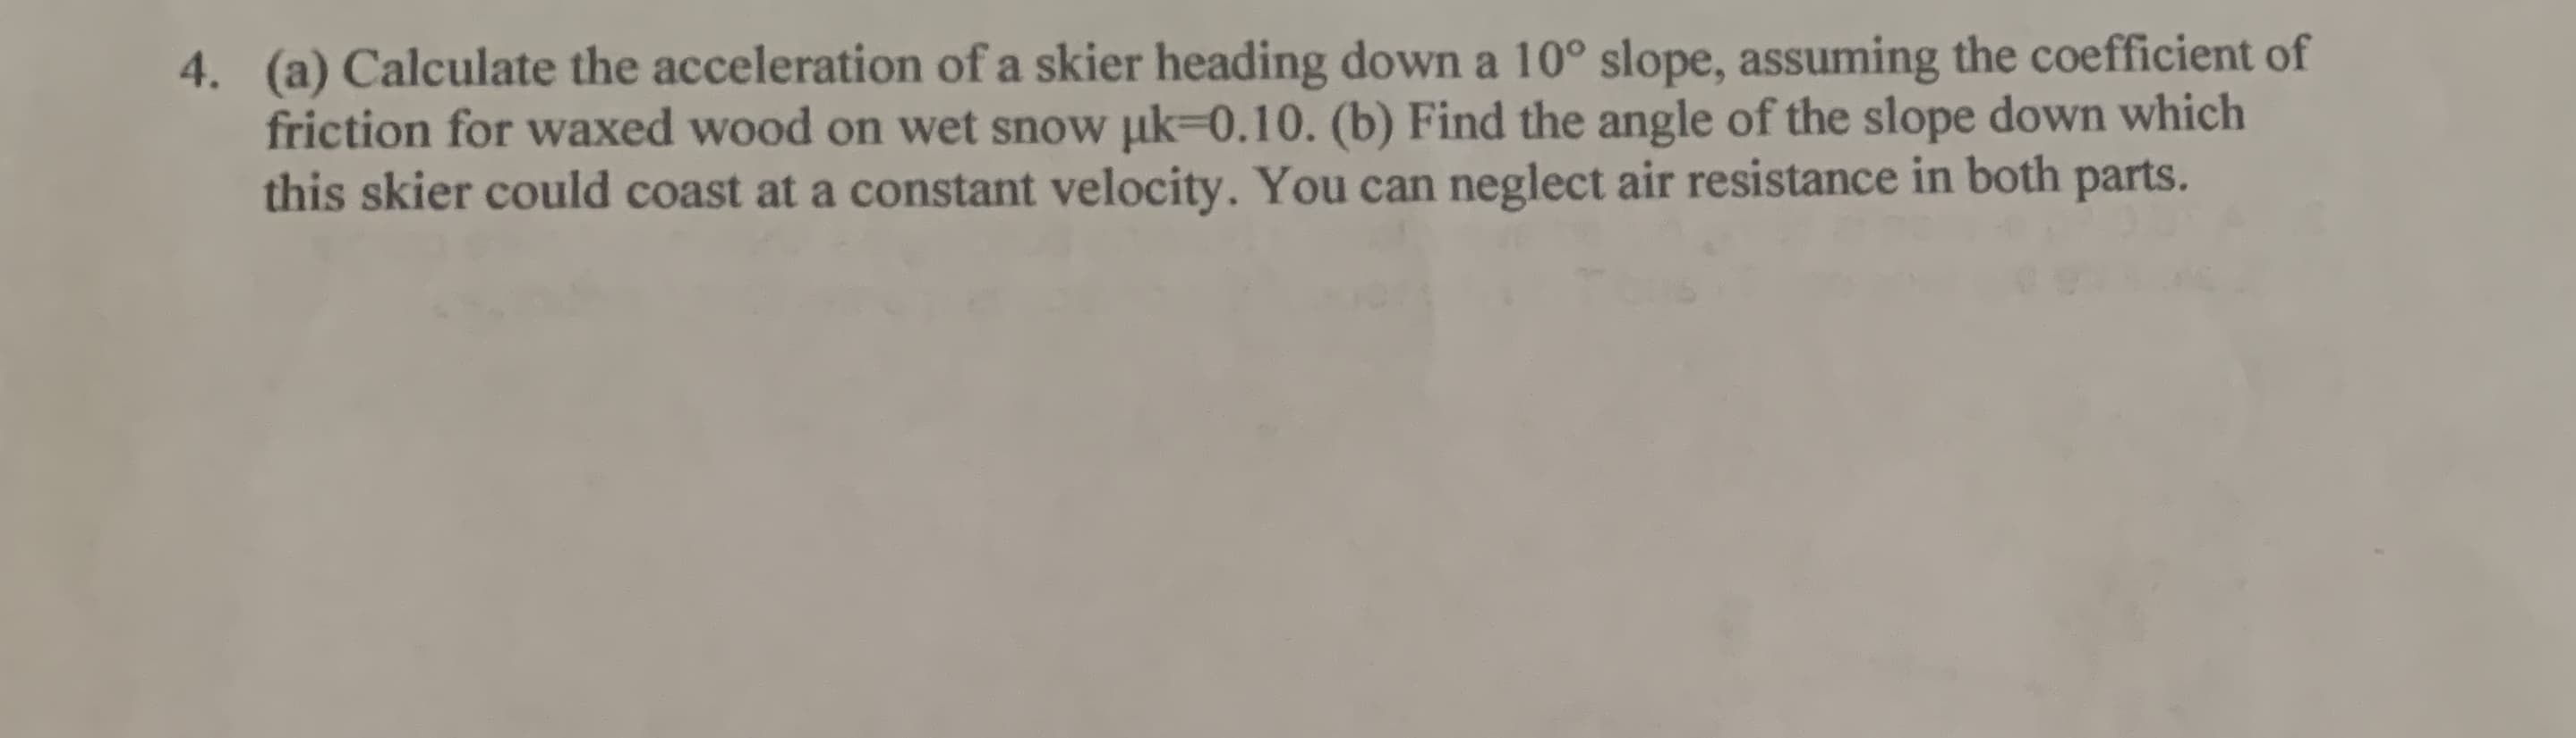 (a) Calculate the acceleration of a skier heading down a 10° slope, assuming the coefficient of
friction for waxed wood on wet snow uk-0.10. (b) Find the angle of the slope down which
this skier could coast at a constant velocity. You can neglect air resistance in both
4.
parts.
